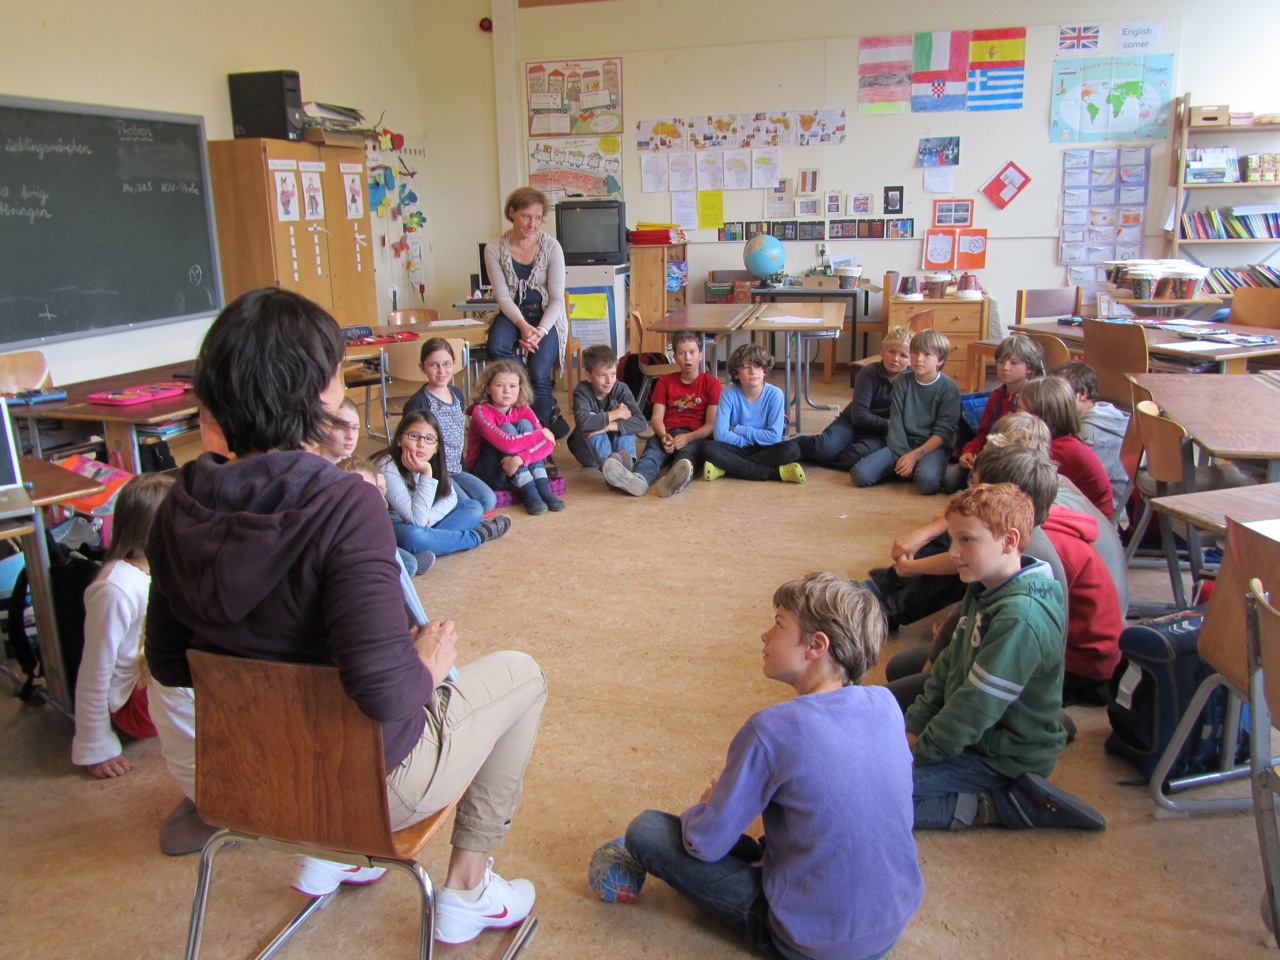 Julia speaking to school children about the life of an African child